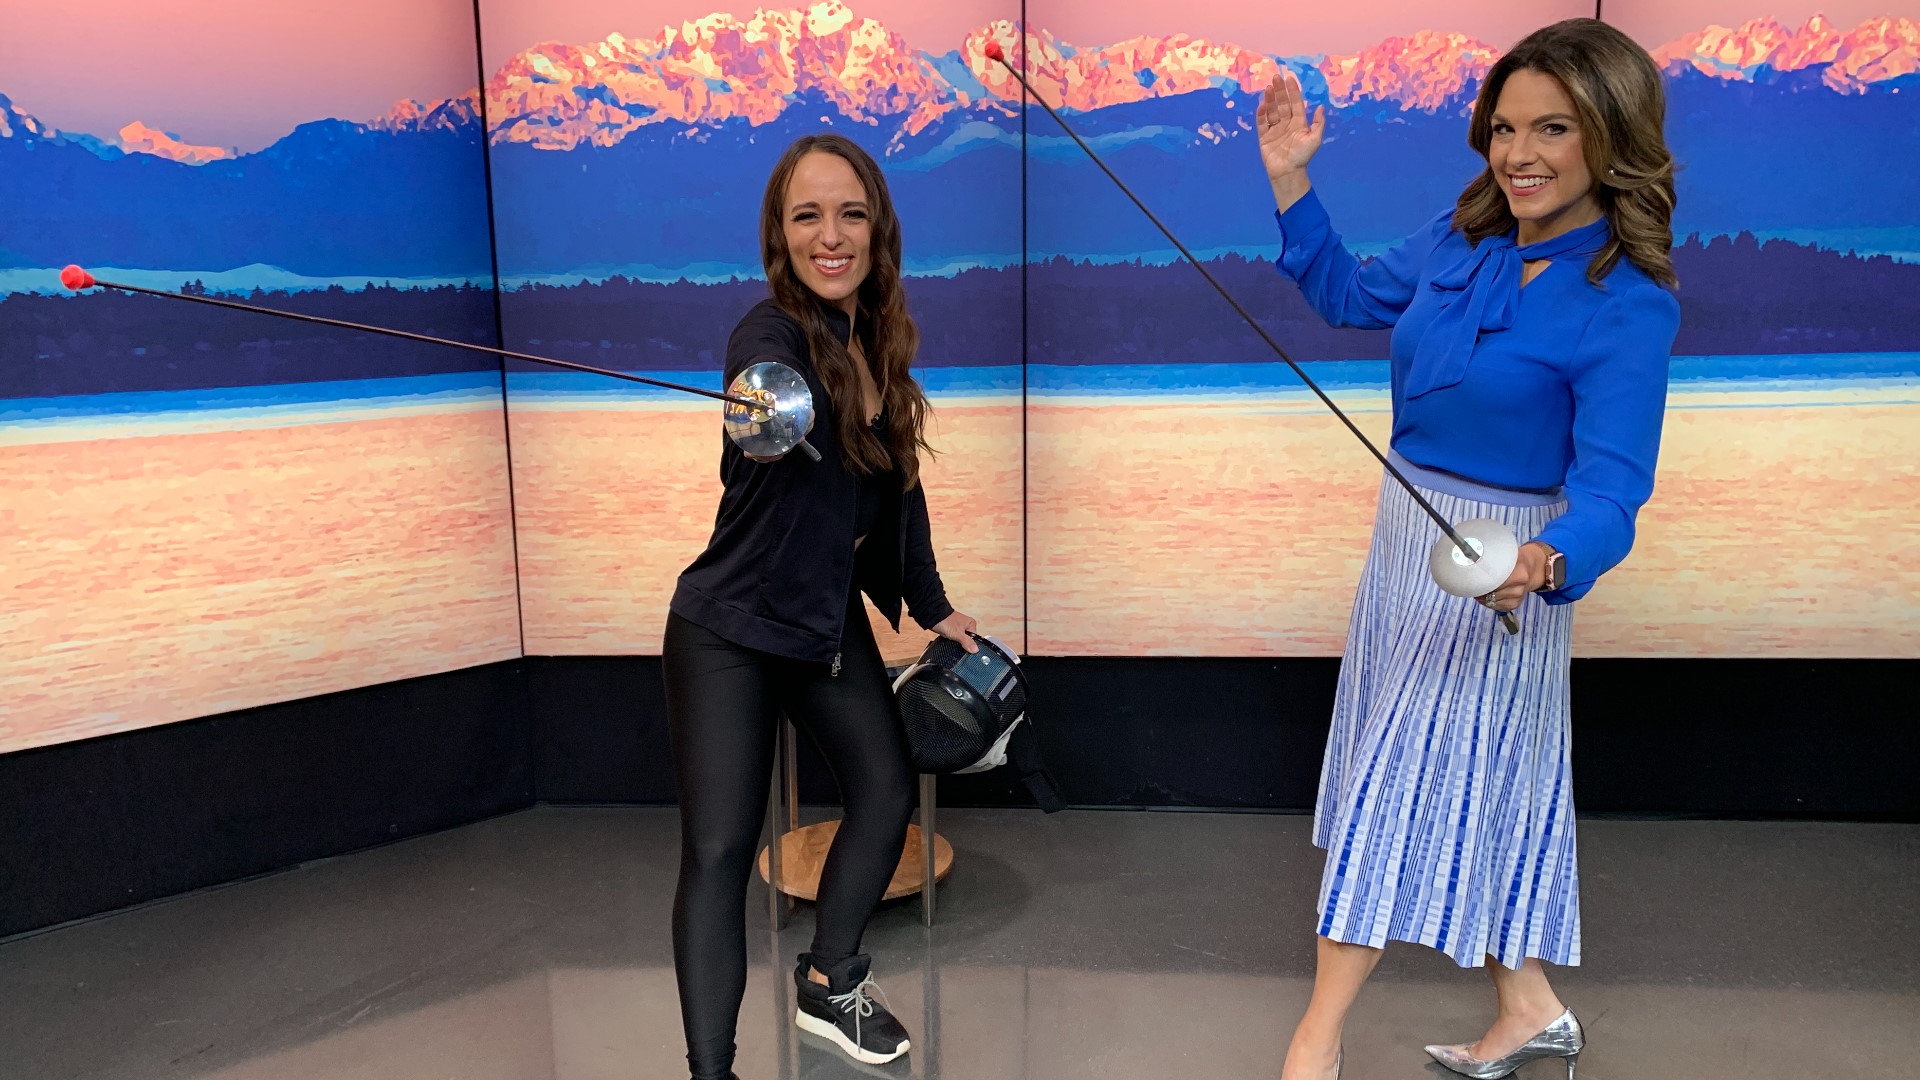 From snowshoeing to fencing, Local Lens' Kelly Hanson joined New Day NW to share some of her favorite out-of-the-box exercise activities. Sponsored by Premera.